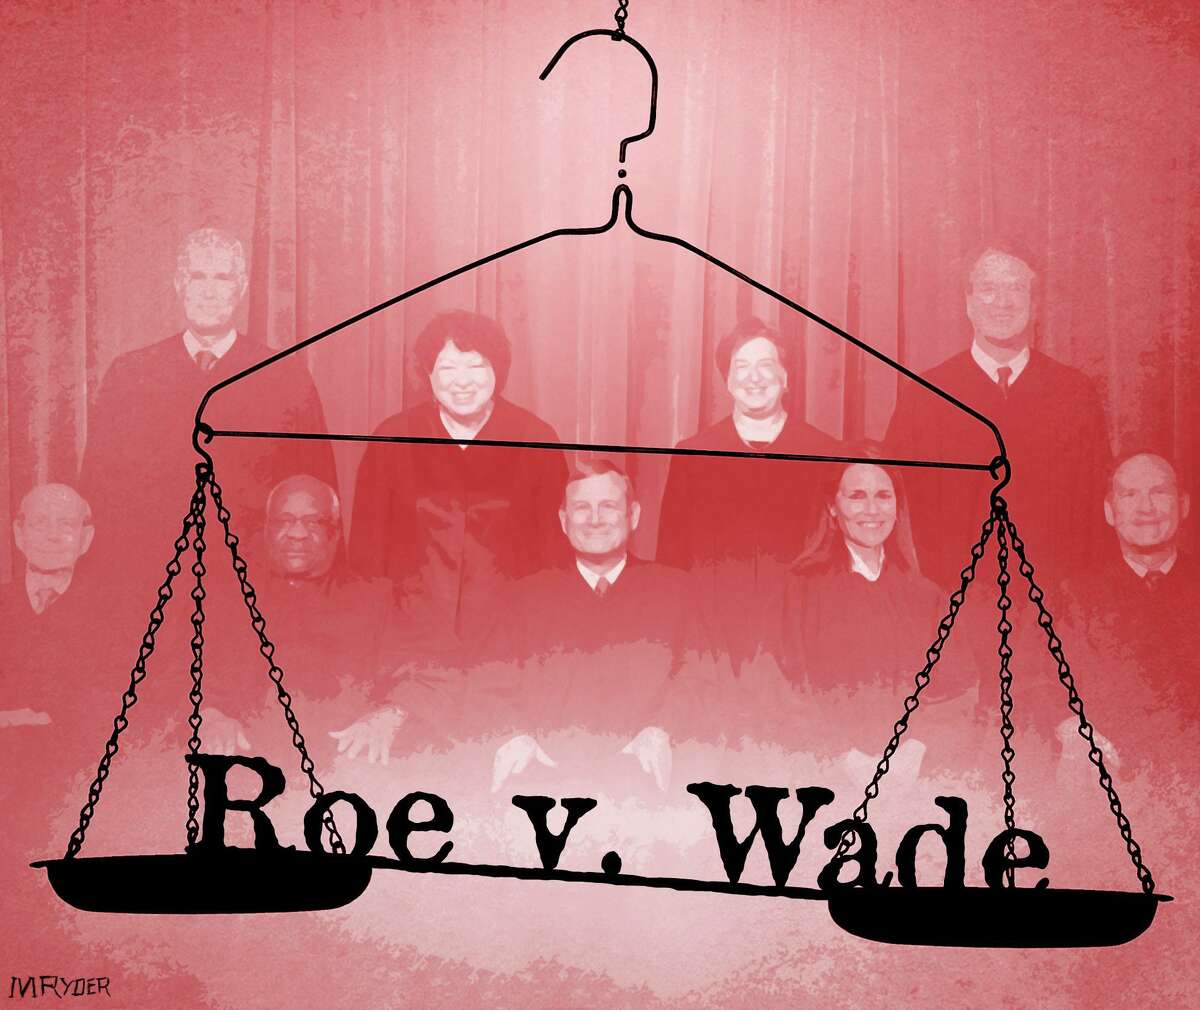 This artwork by M. Ryder refers to Roe v. Wade being re-argued in the Supreme Court.